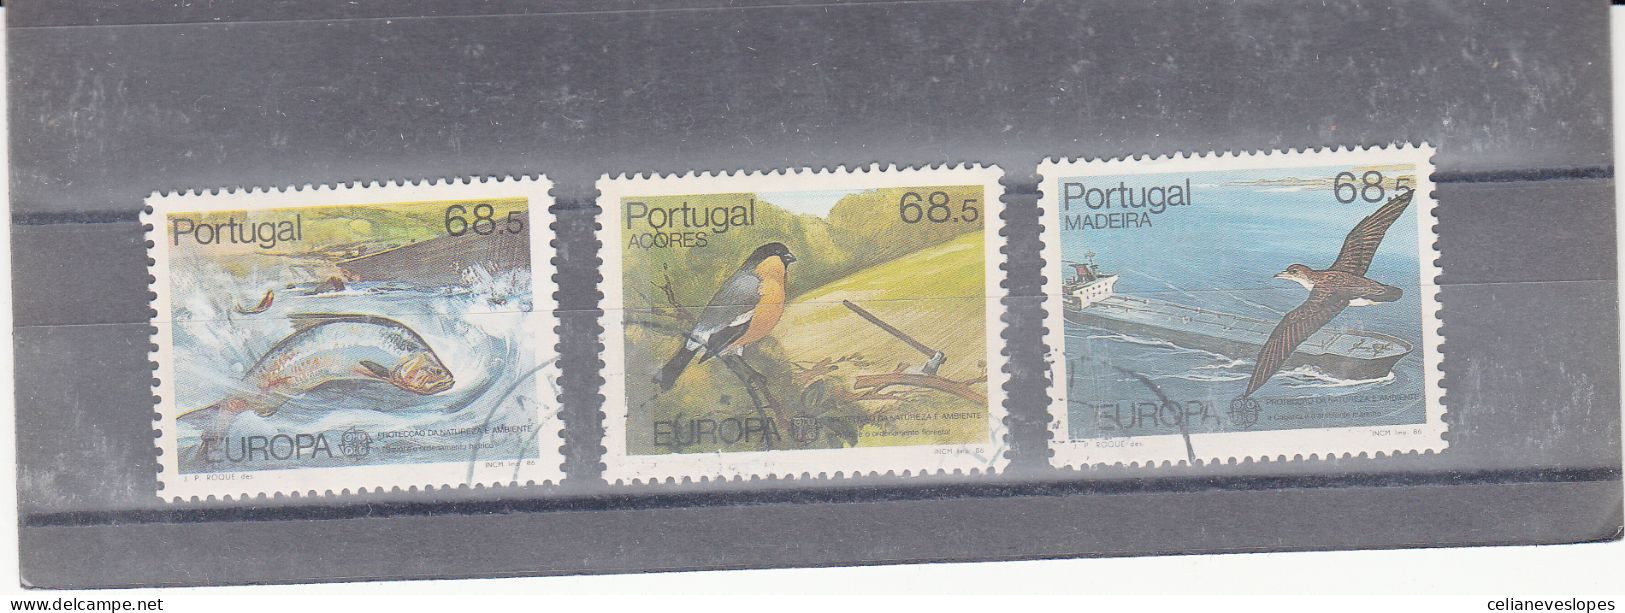 Portugal, Europa - CEPT, 1985, Mundifil Nº 1756 A 1758 Used - Used Stamps